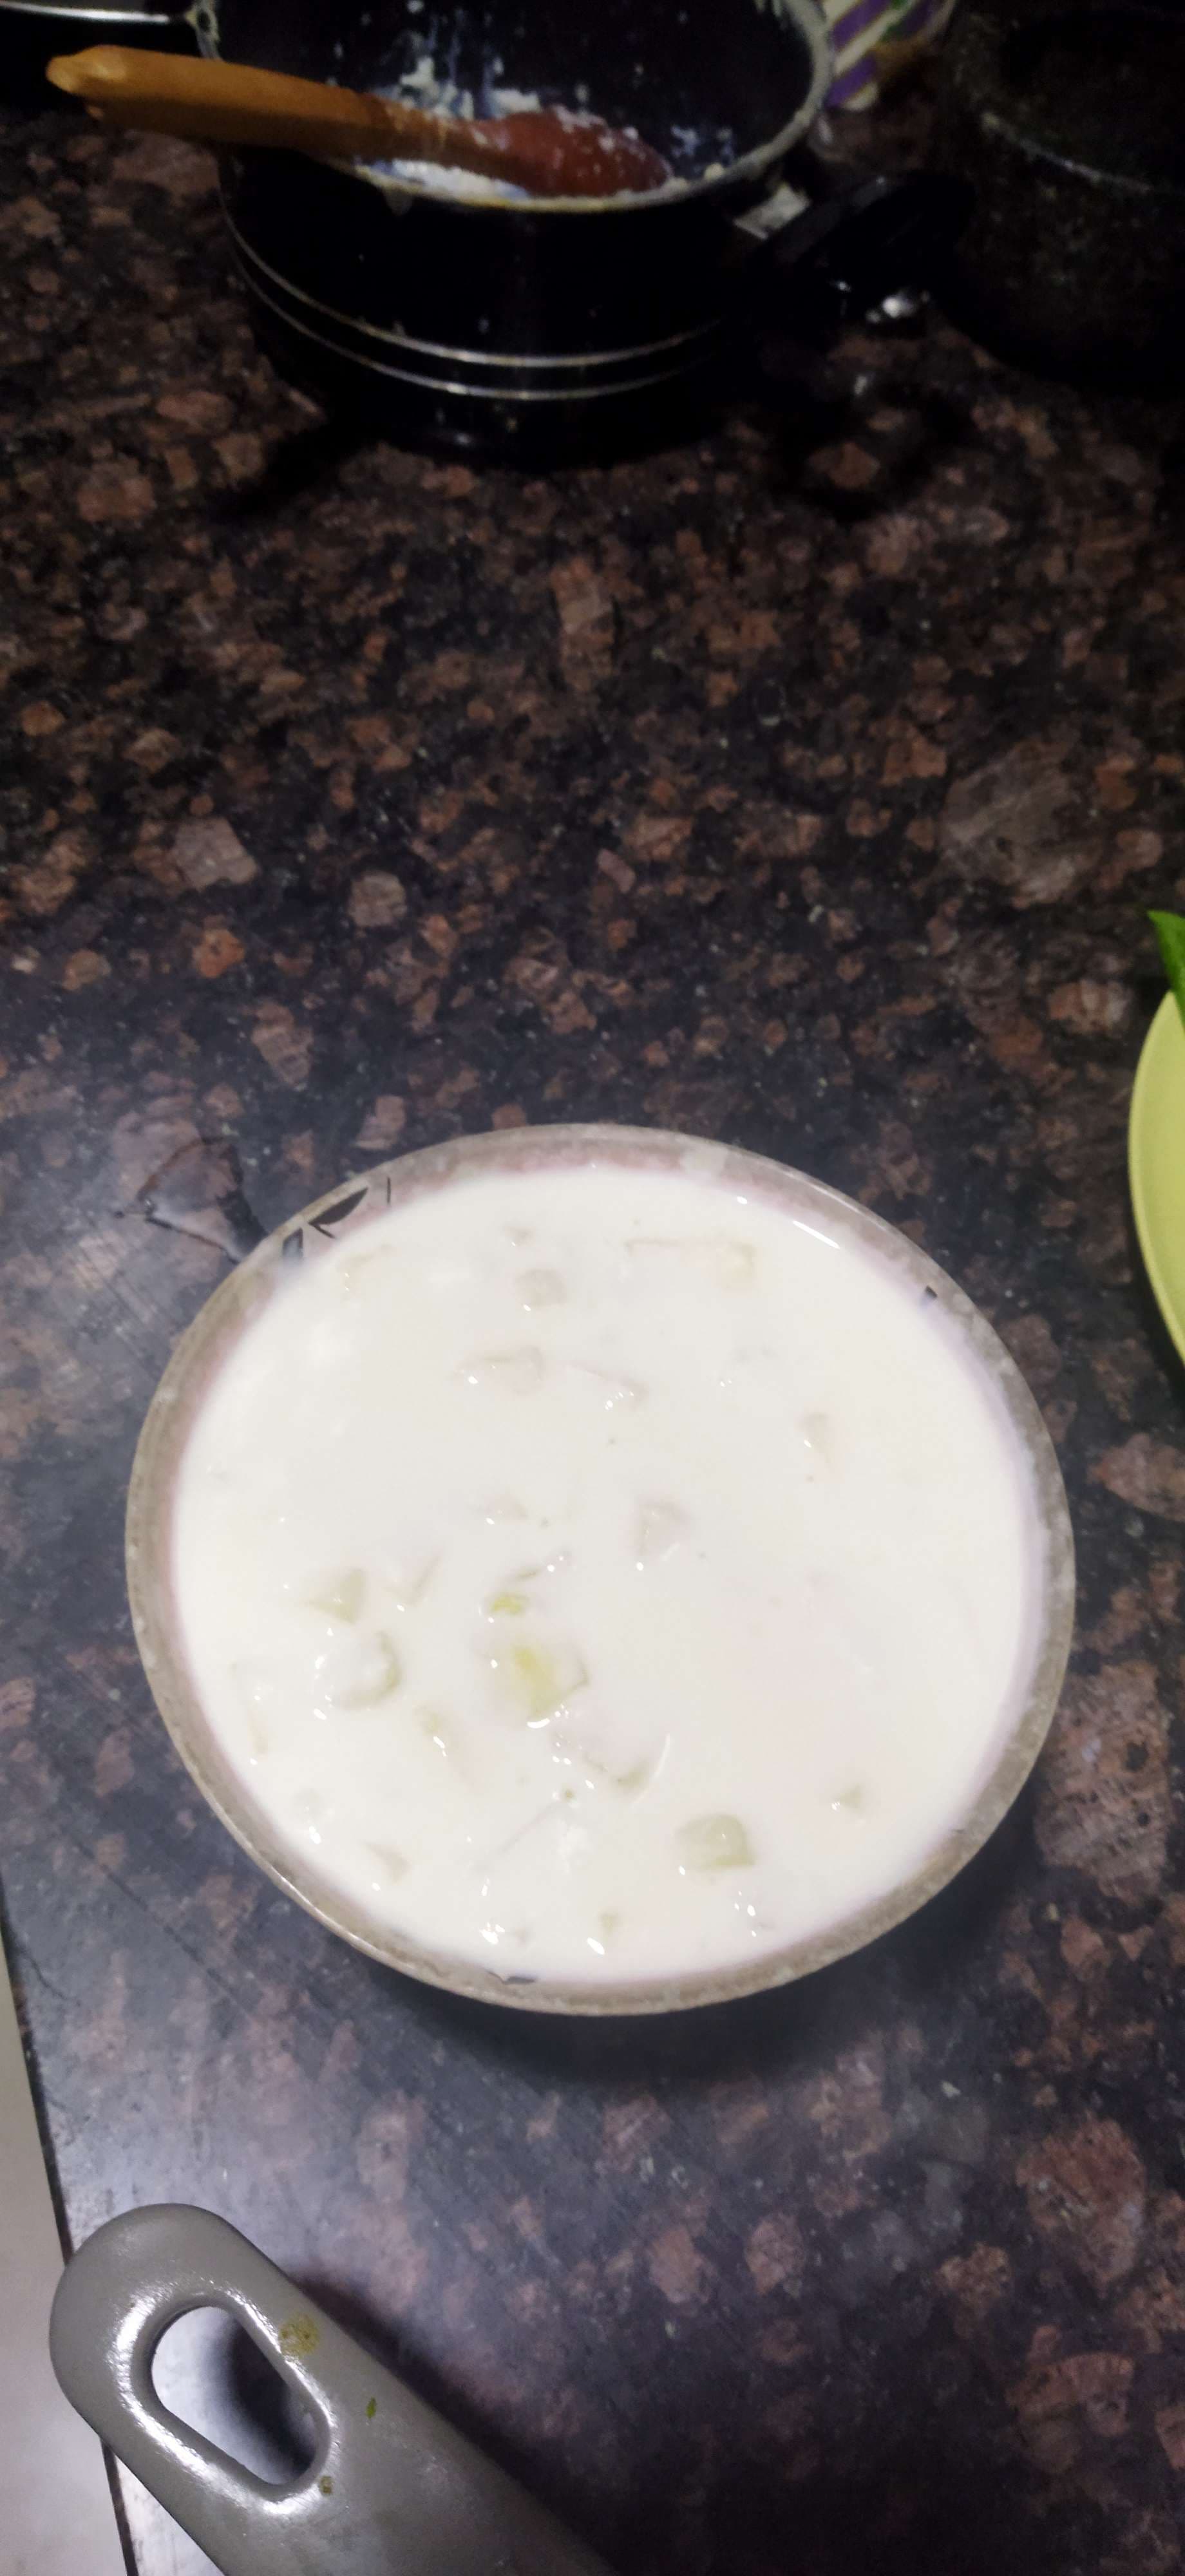 Tasty Pineapple Raita cooked by COOX chefs cooks during occasions parties events at home